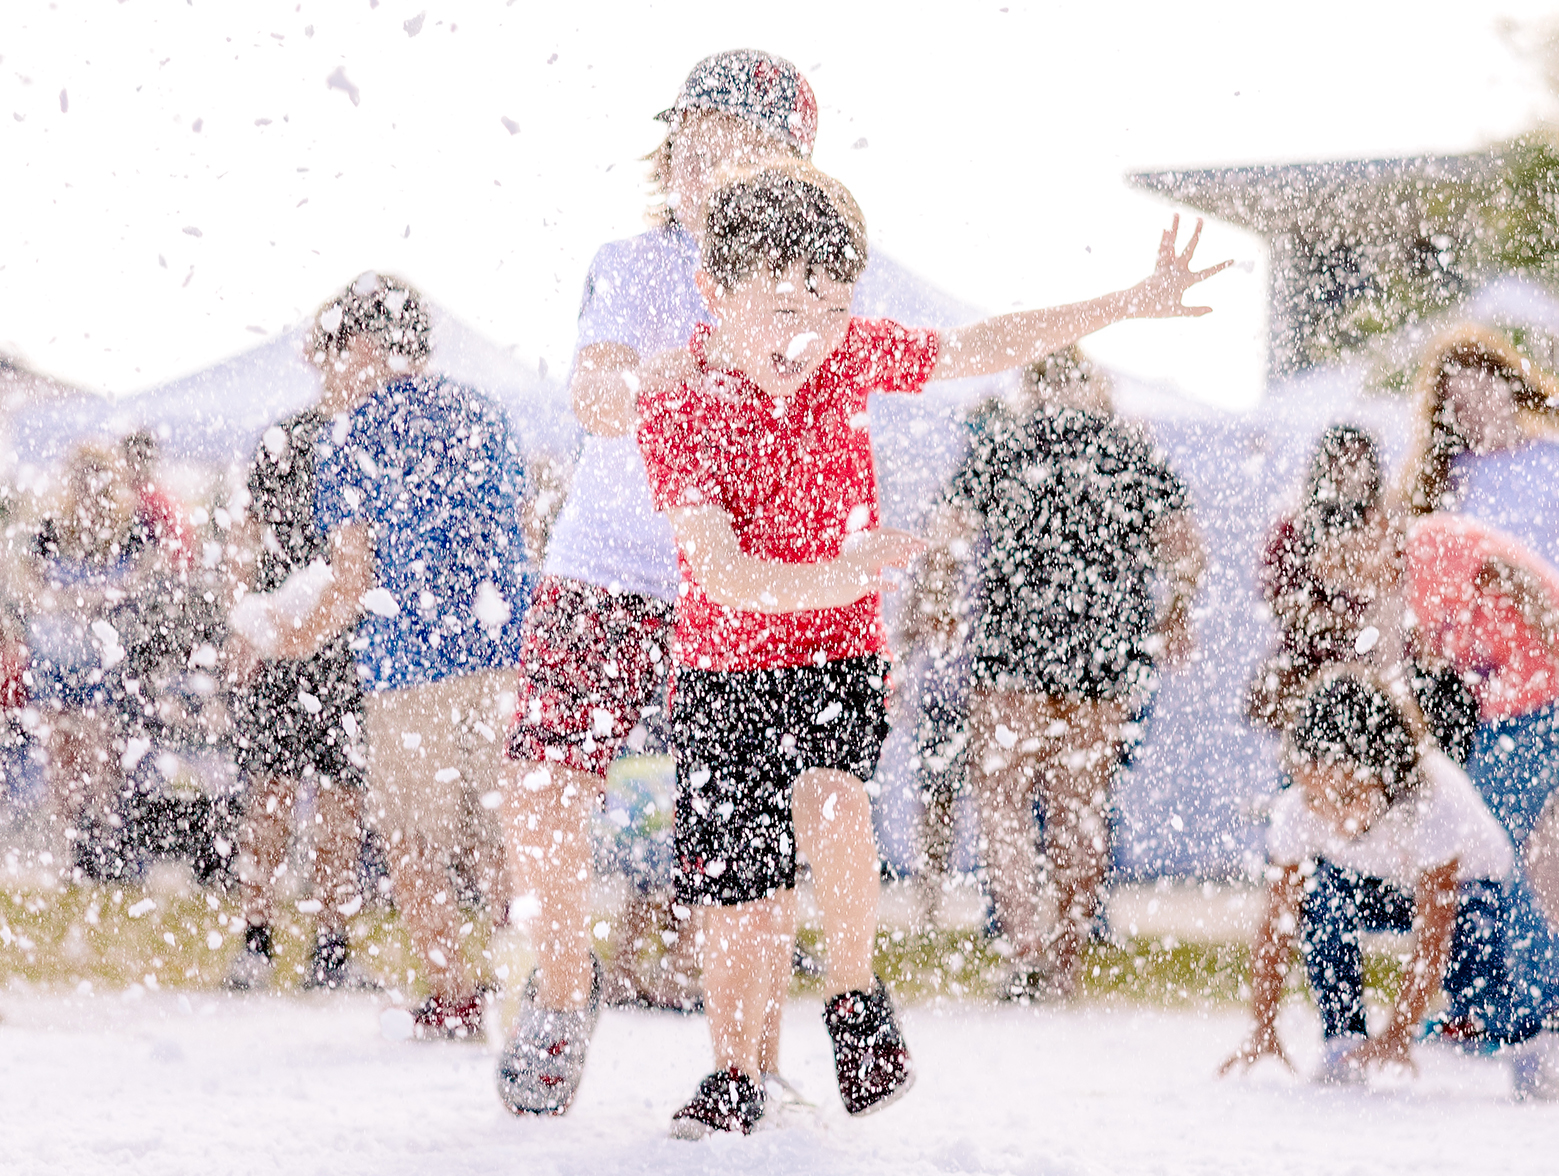 A group of children playing in the snow at an outdoor event.